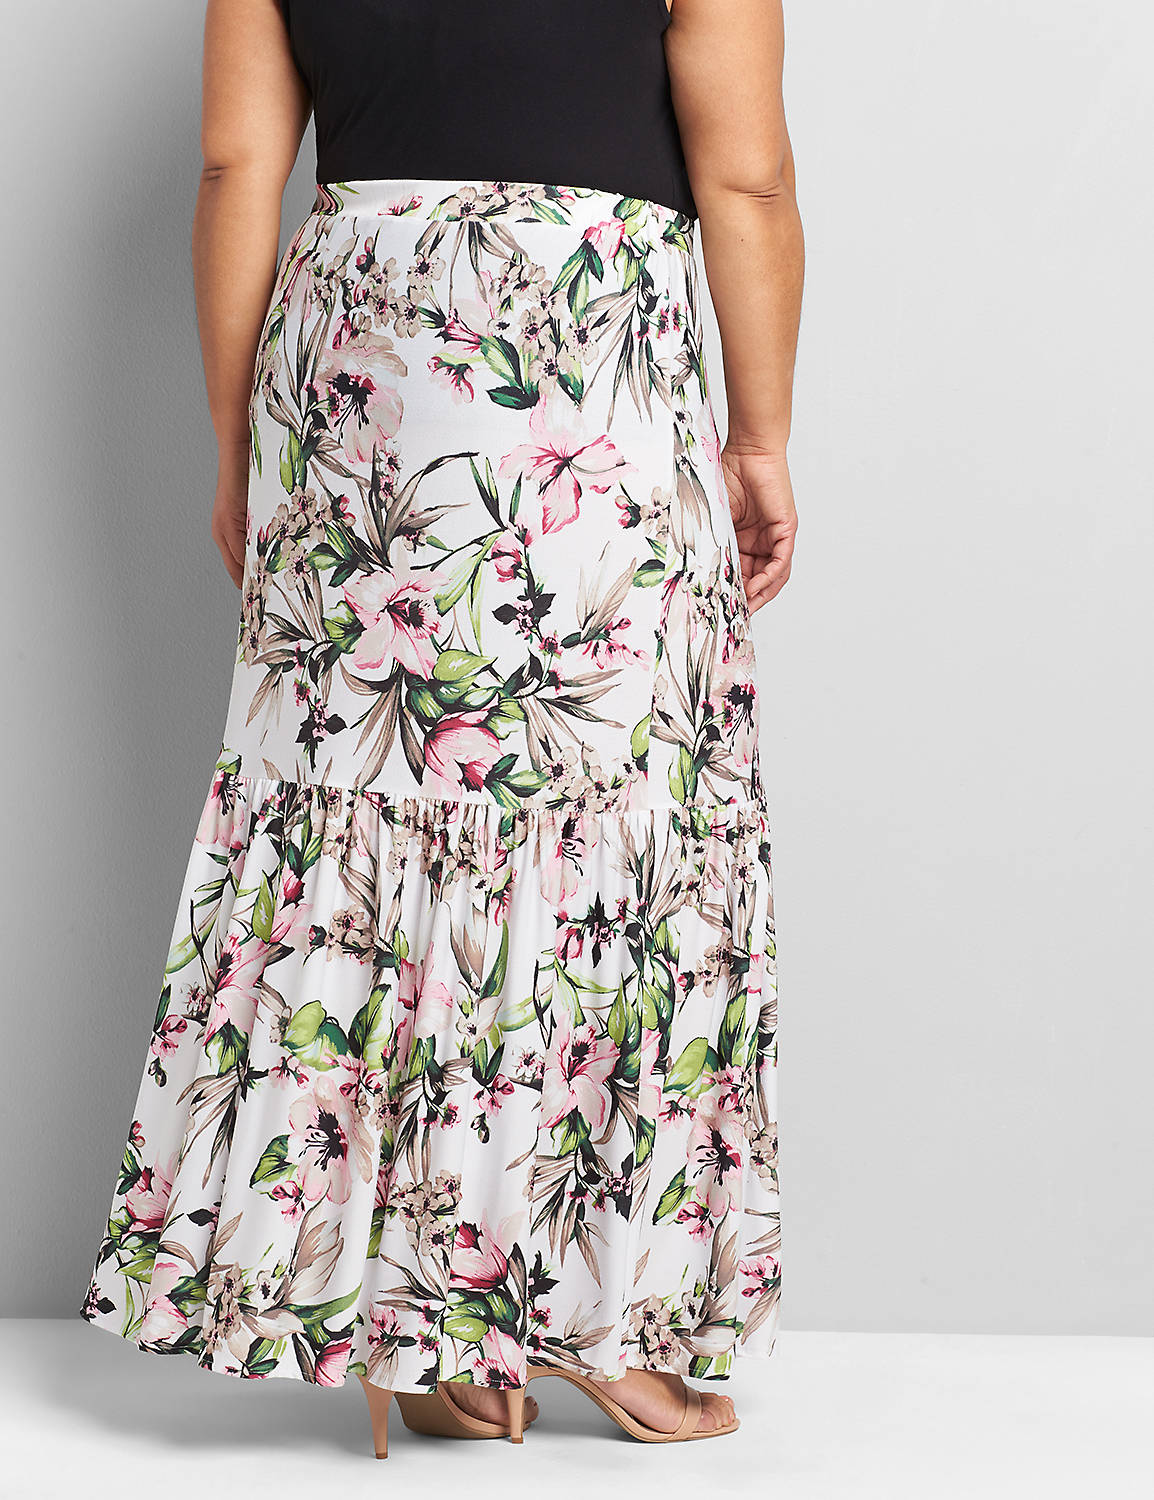 1119194 Pull-On Front Slit Midi Skirt 1119194:LBSP21182_OpenFloralTropical_C1:14/16 Product Image 2